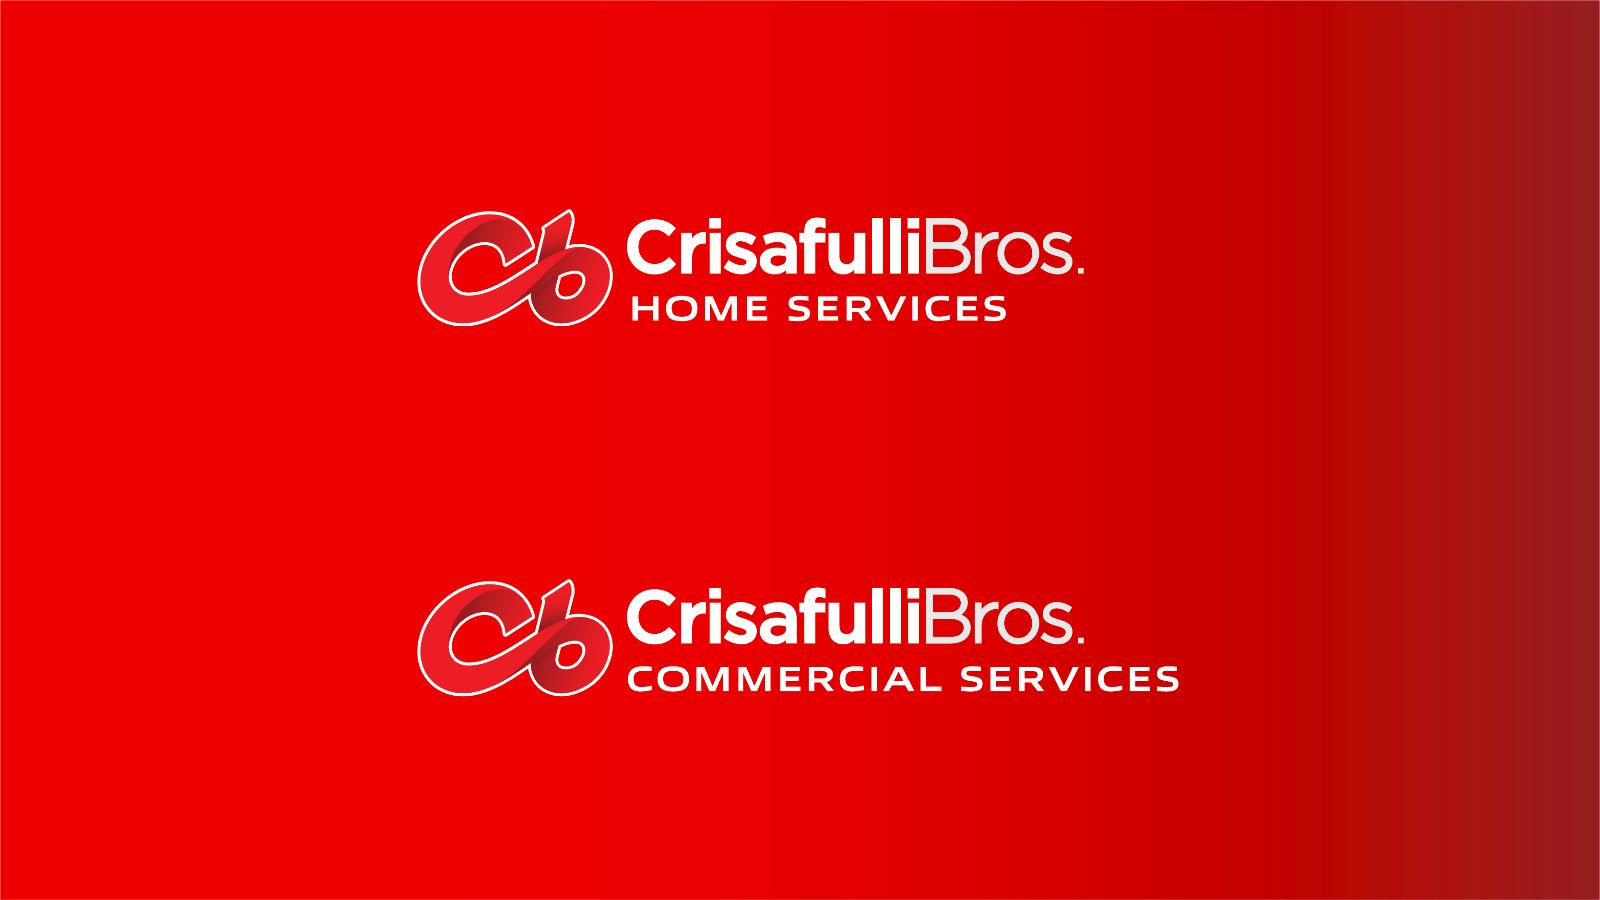 Crisafulli Bros. | Home and Commercial Services Logos